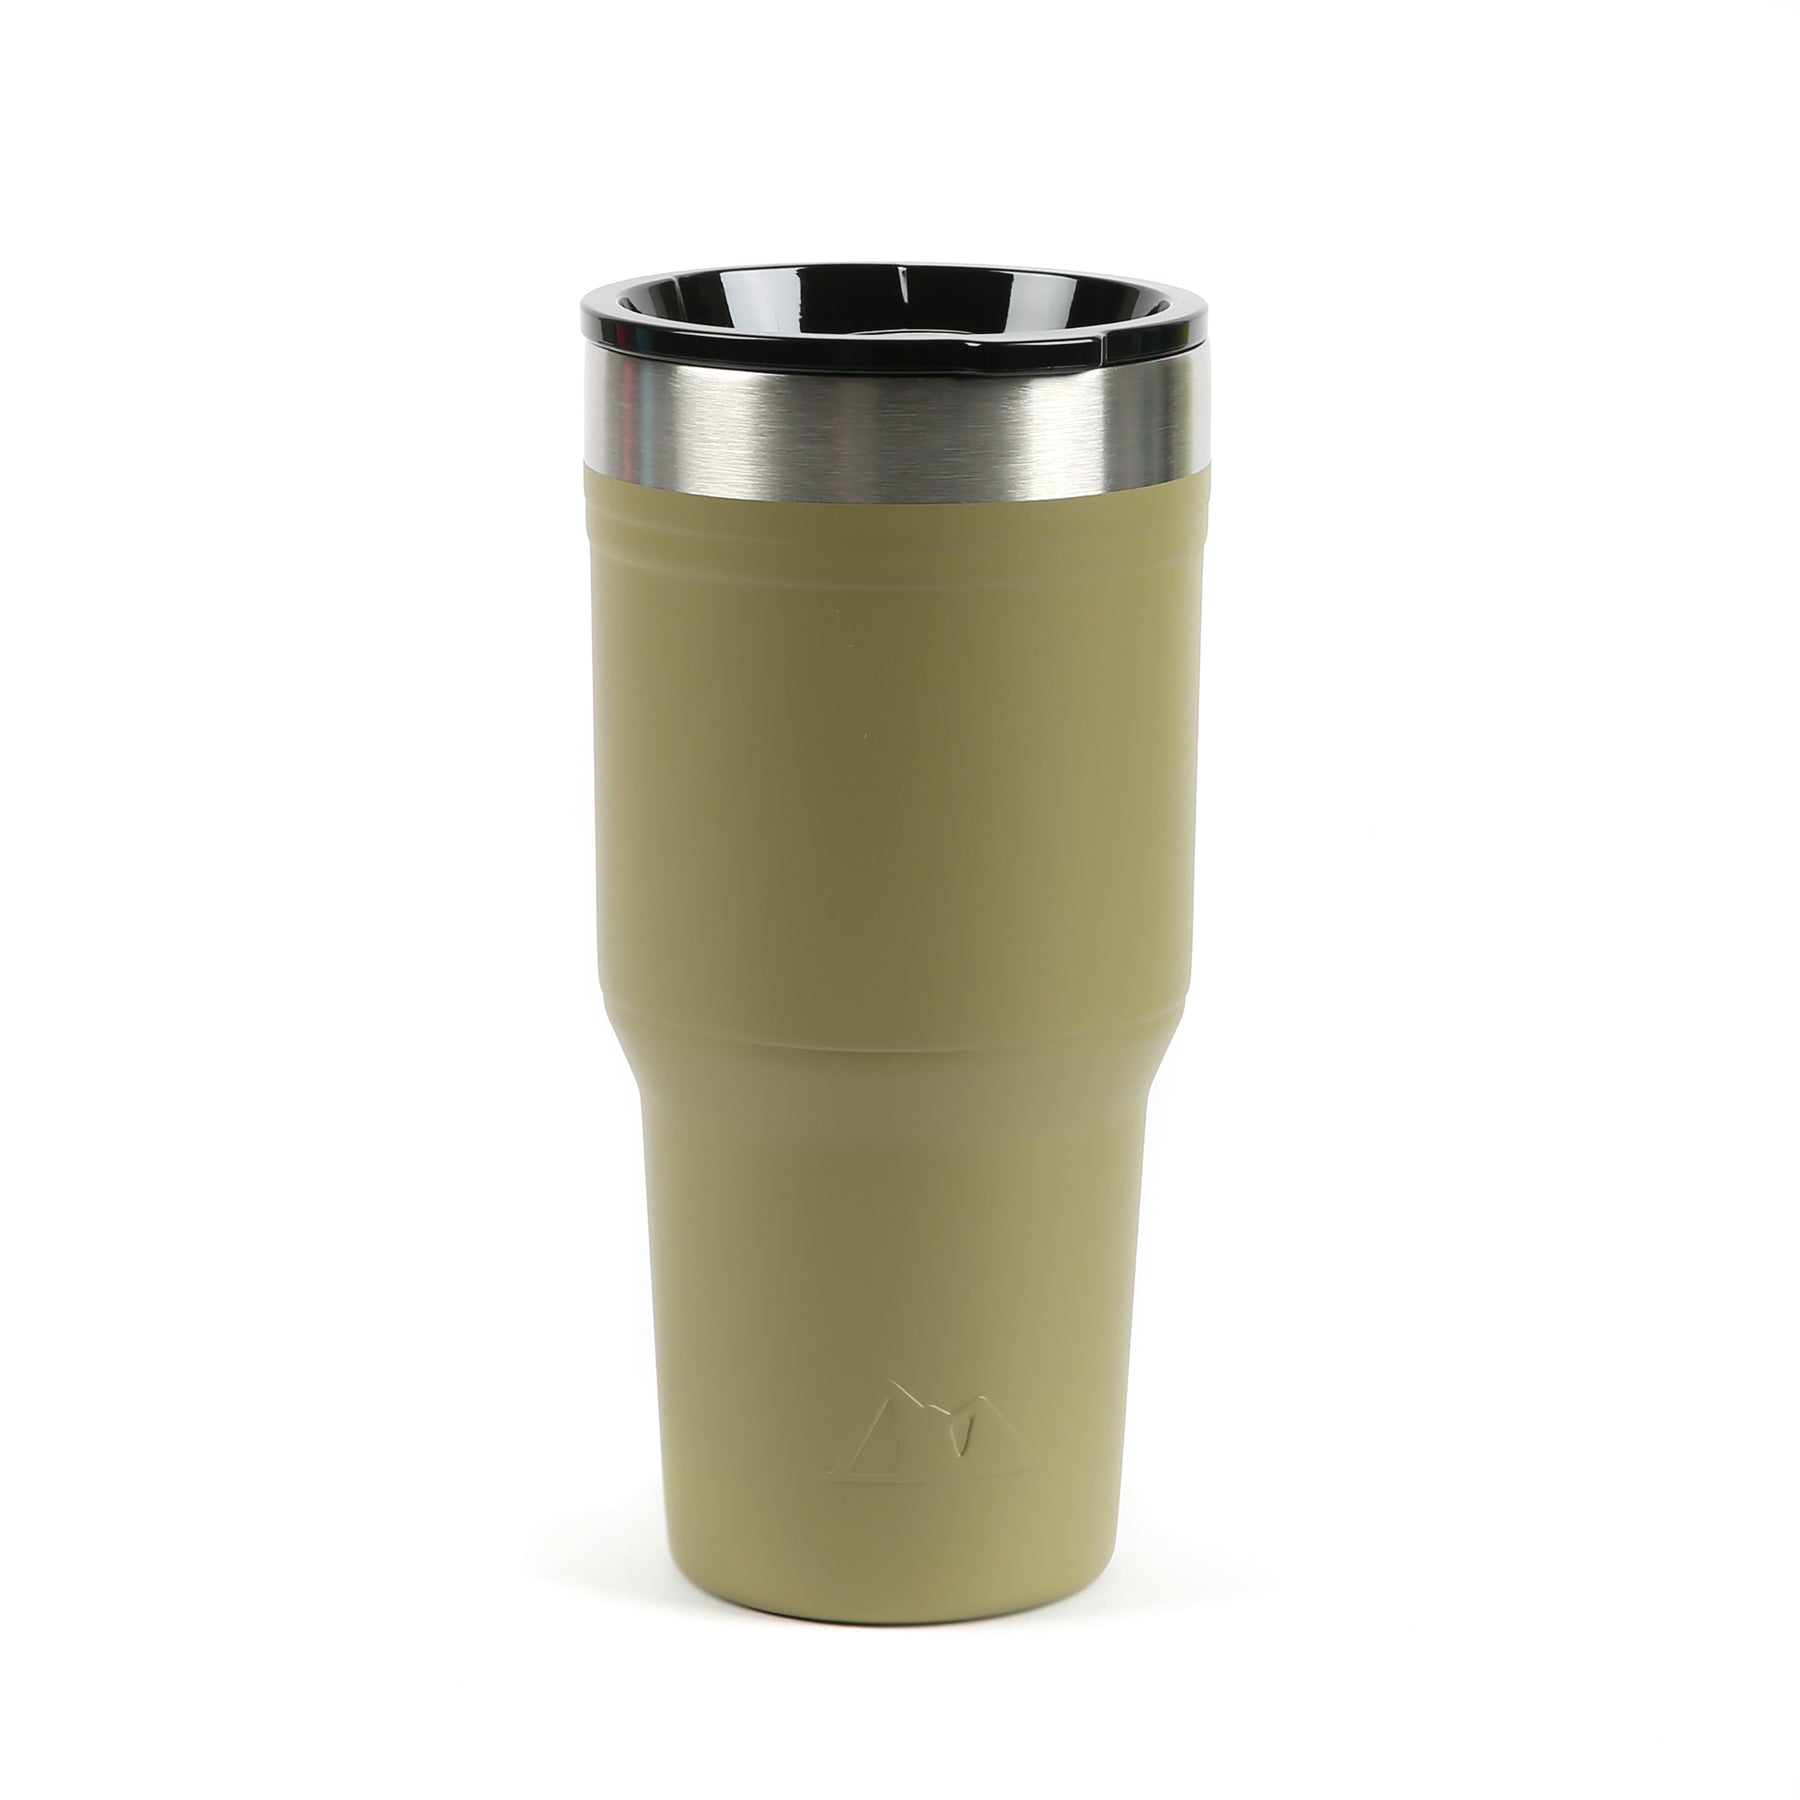 30 oz. Stainless Steel Tumbler with Microban Infused Lid* Pine by Arctic Zone